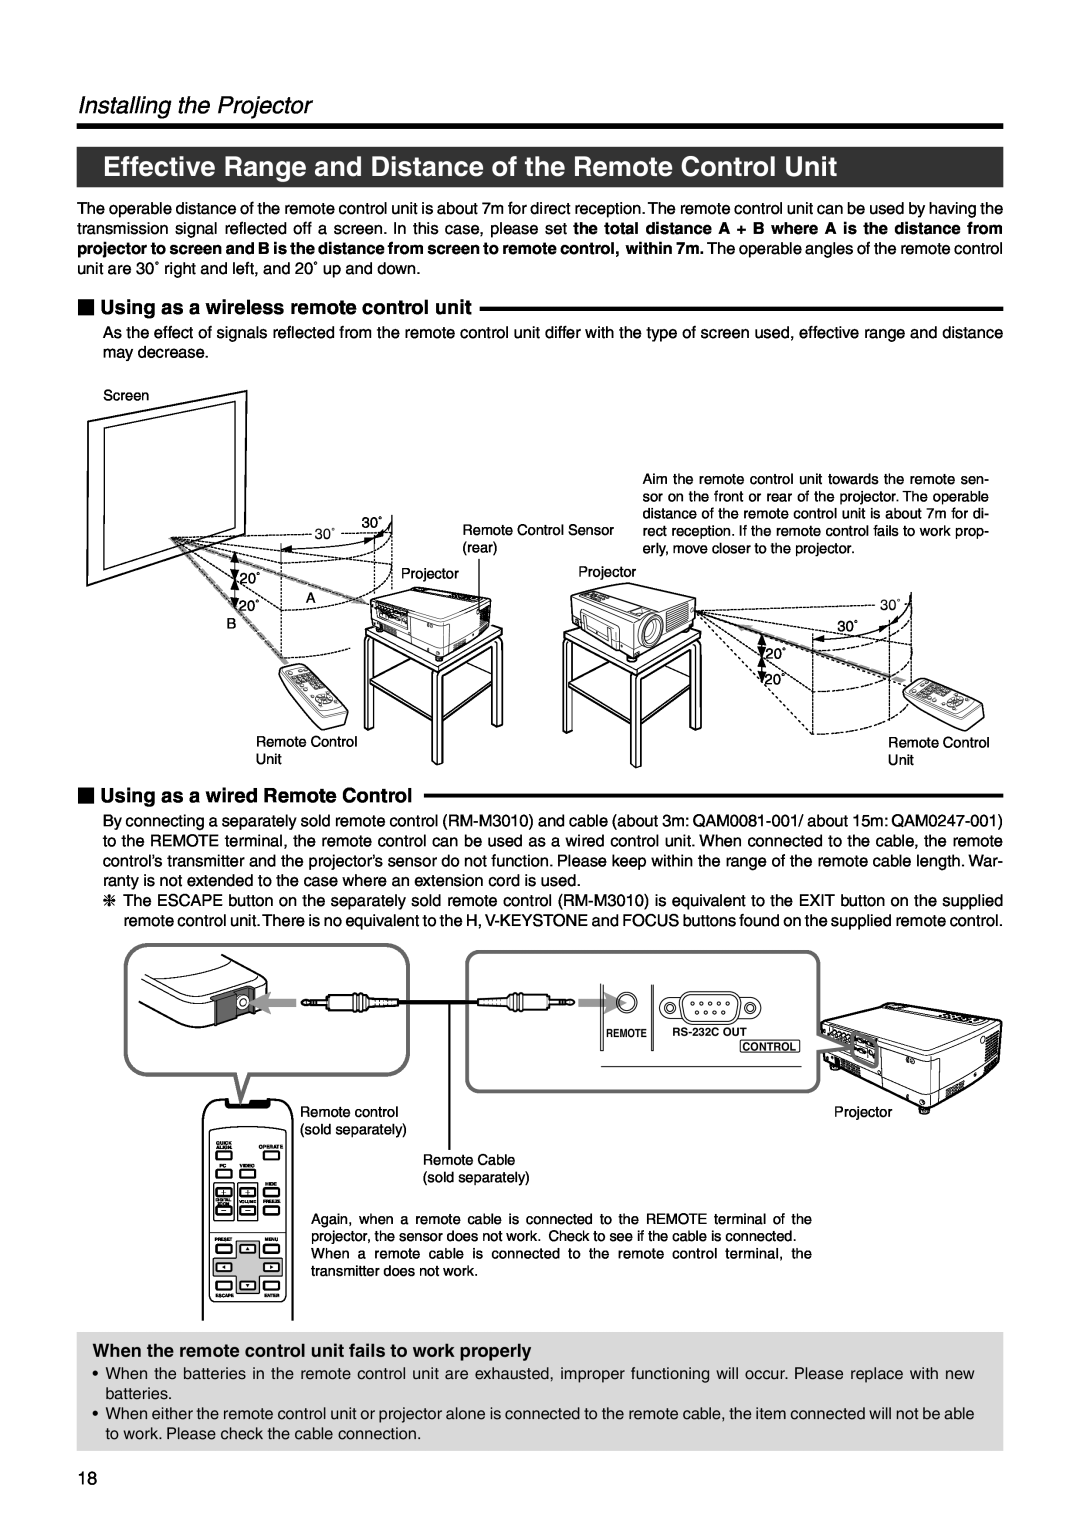 Dukane 28A9017 user manual Effective Range and Distance of the Remote Control Unit, Installing the Projector 